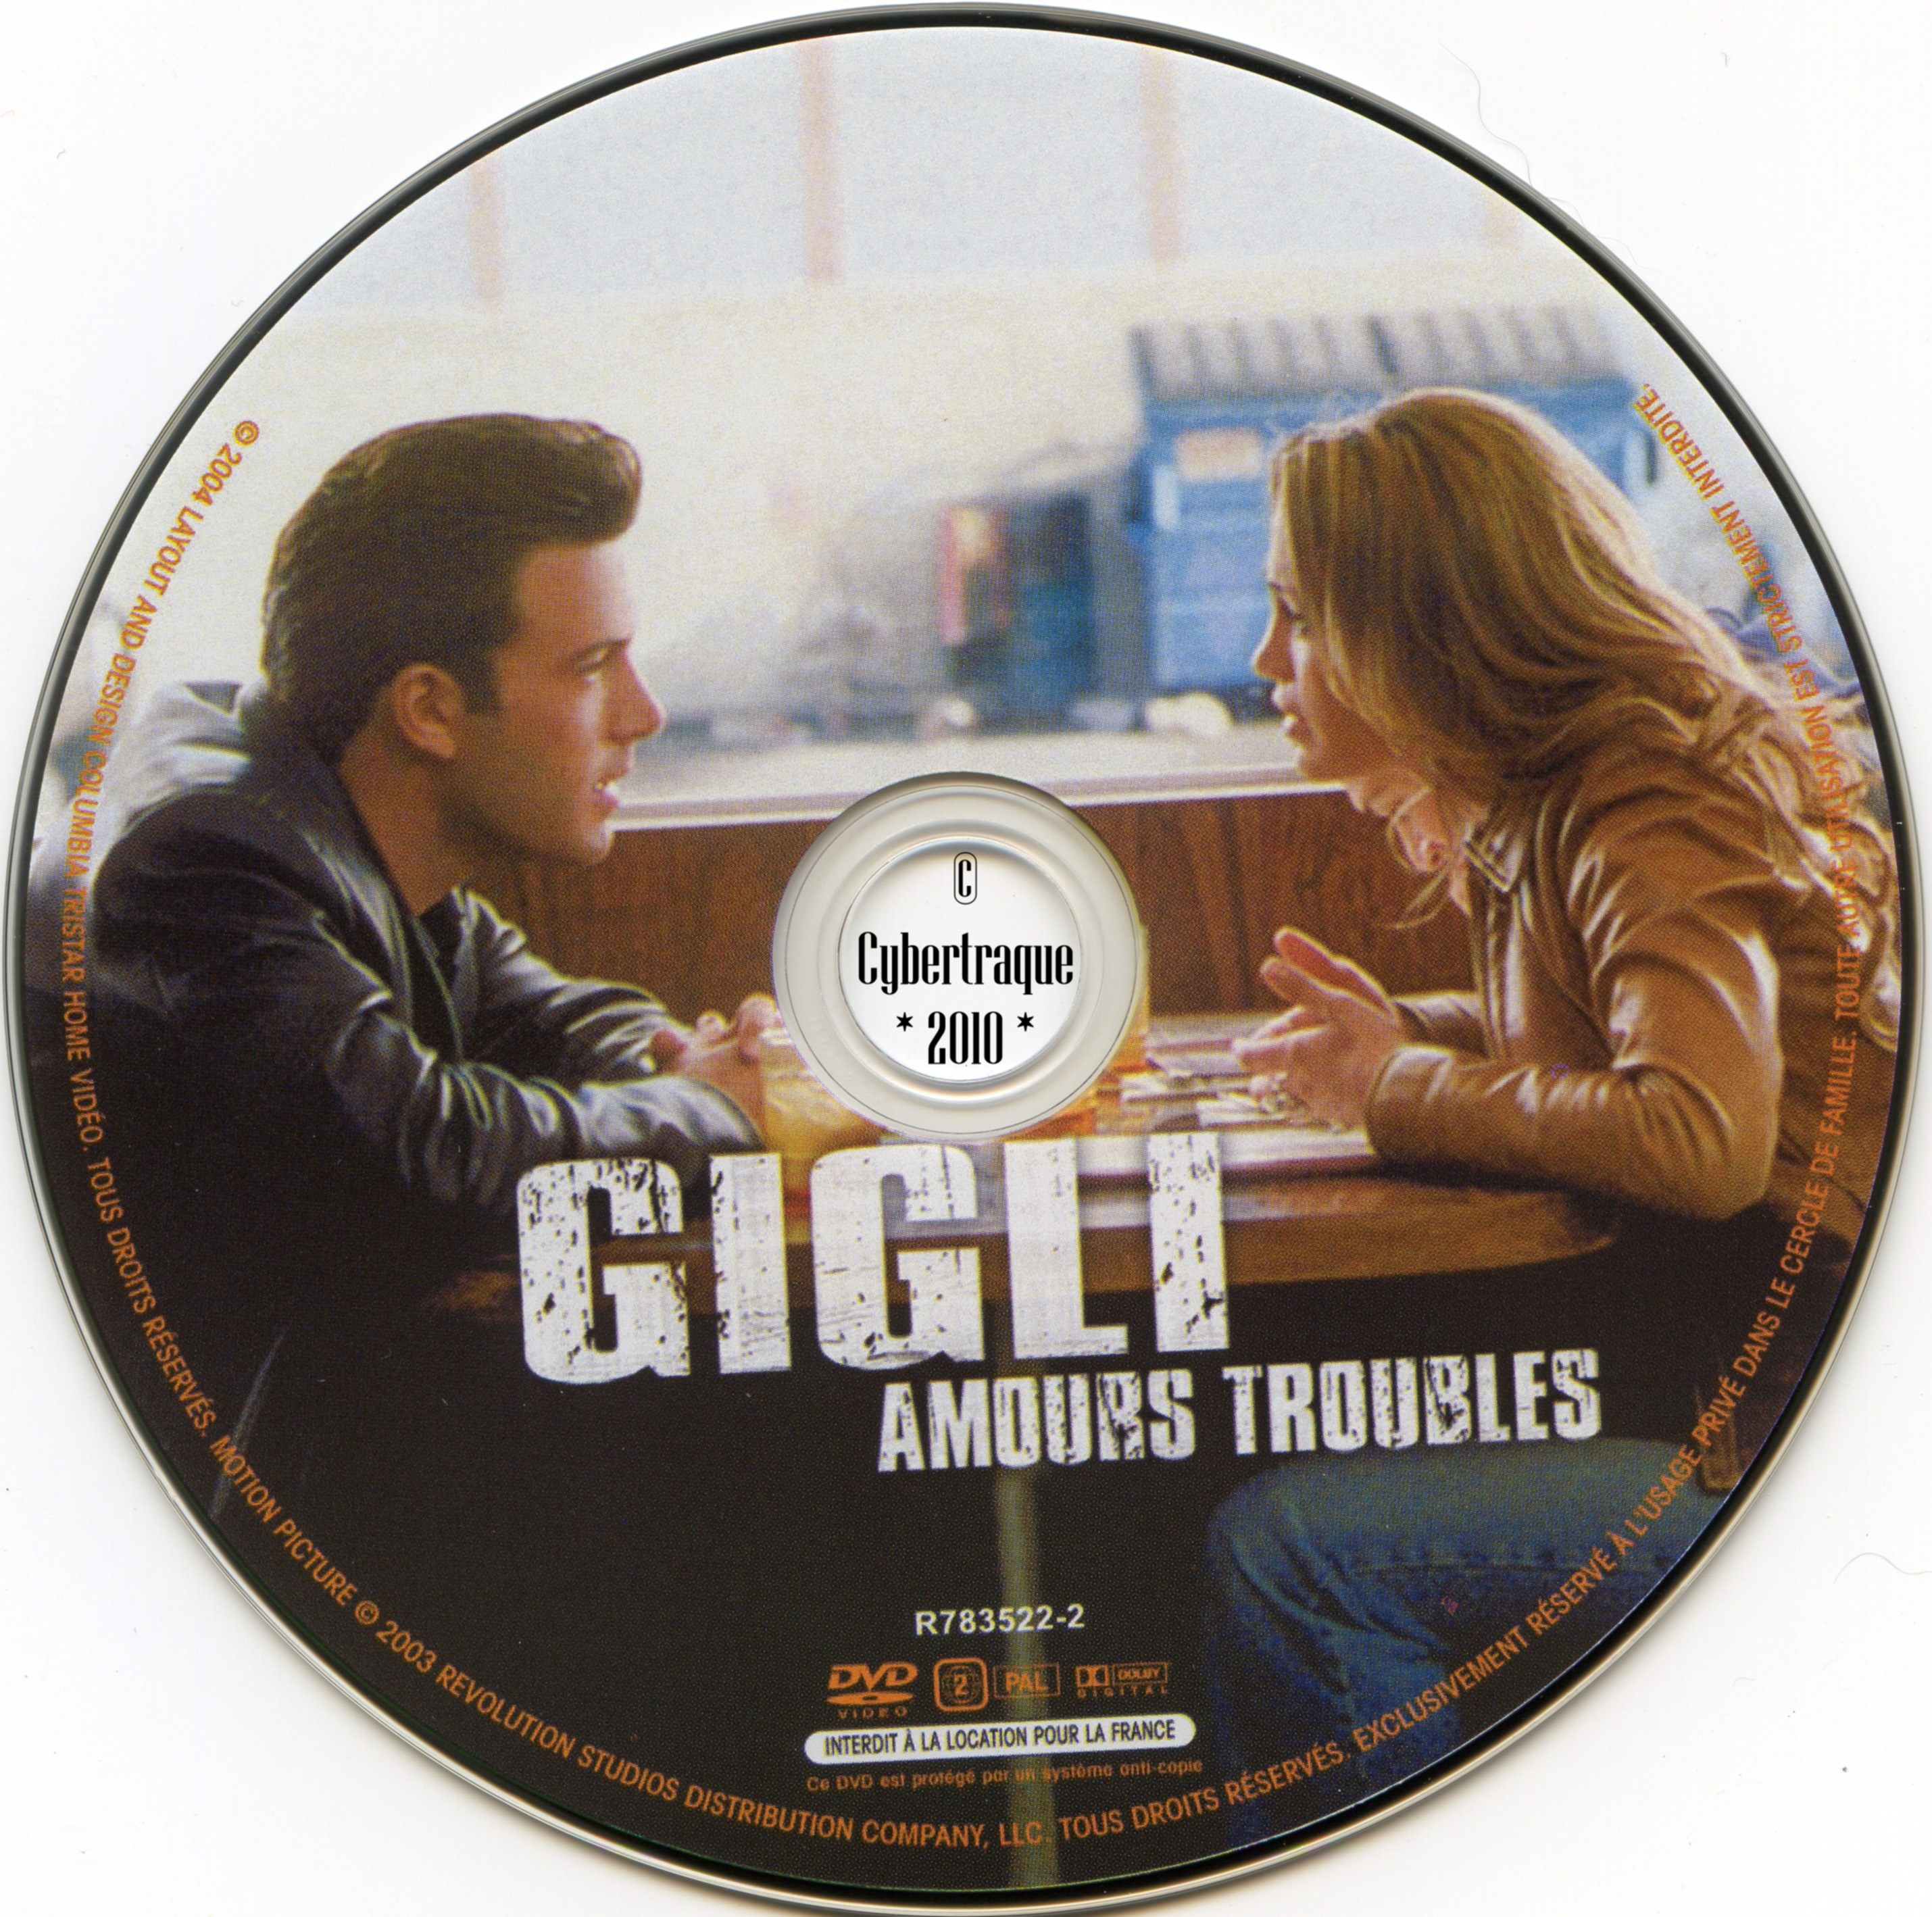 Gigli Amours troubles v2